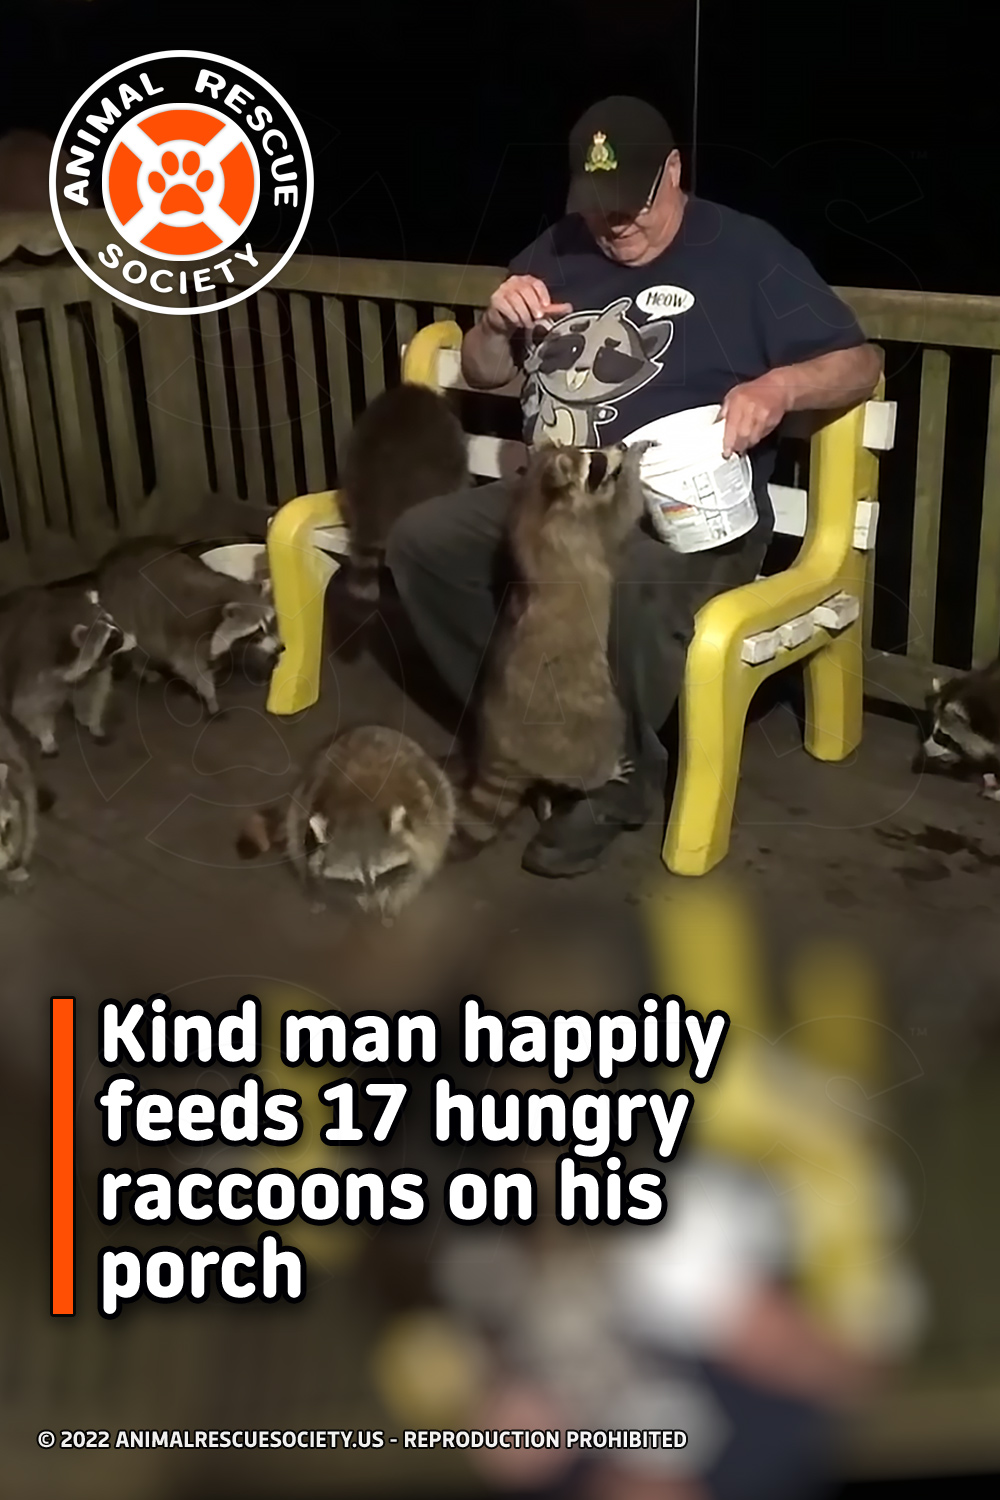 Kind man happily feeds 17 hungry raccoons on his porch